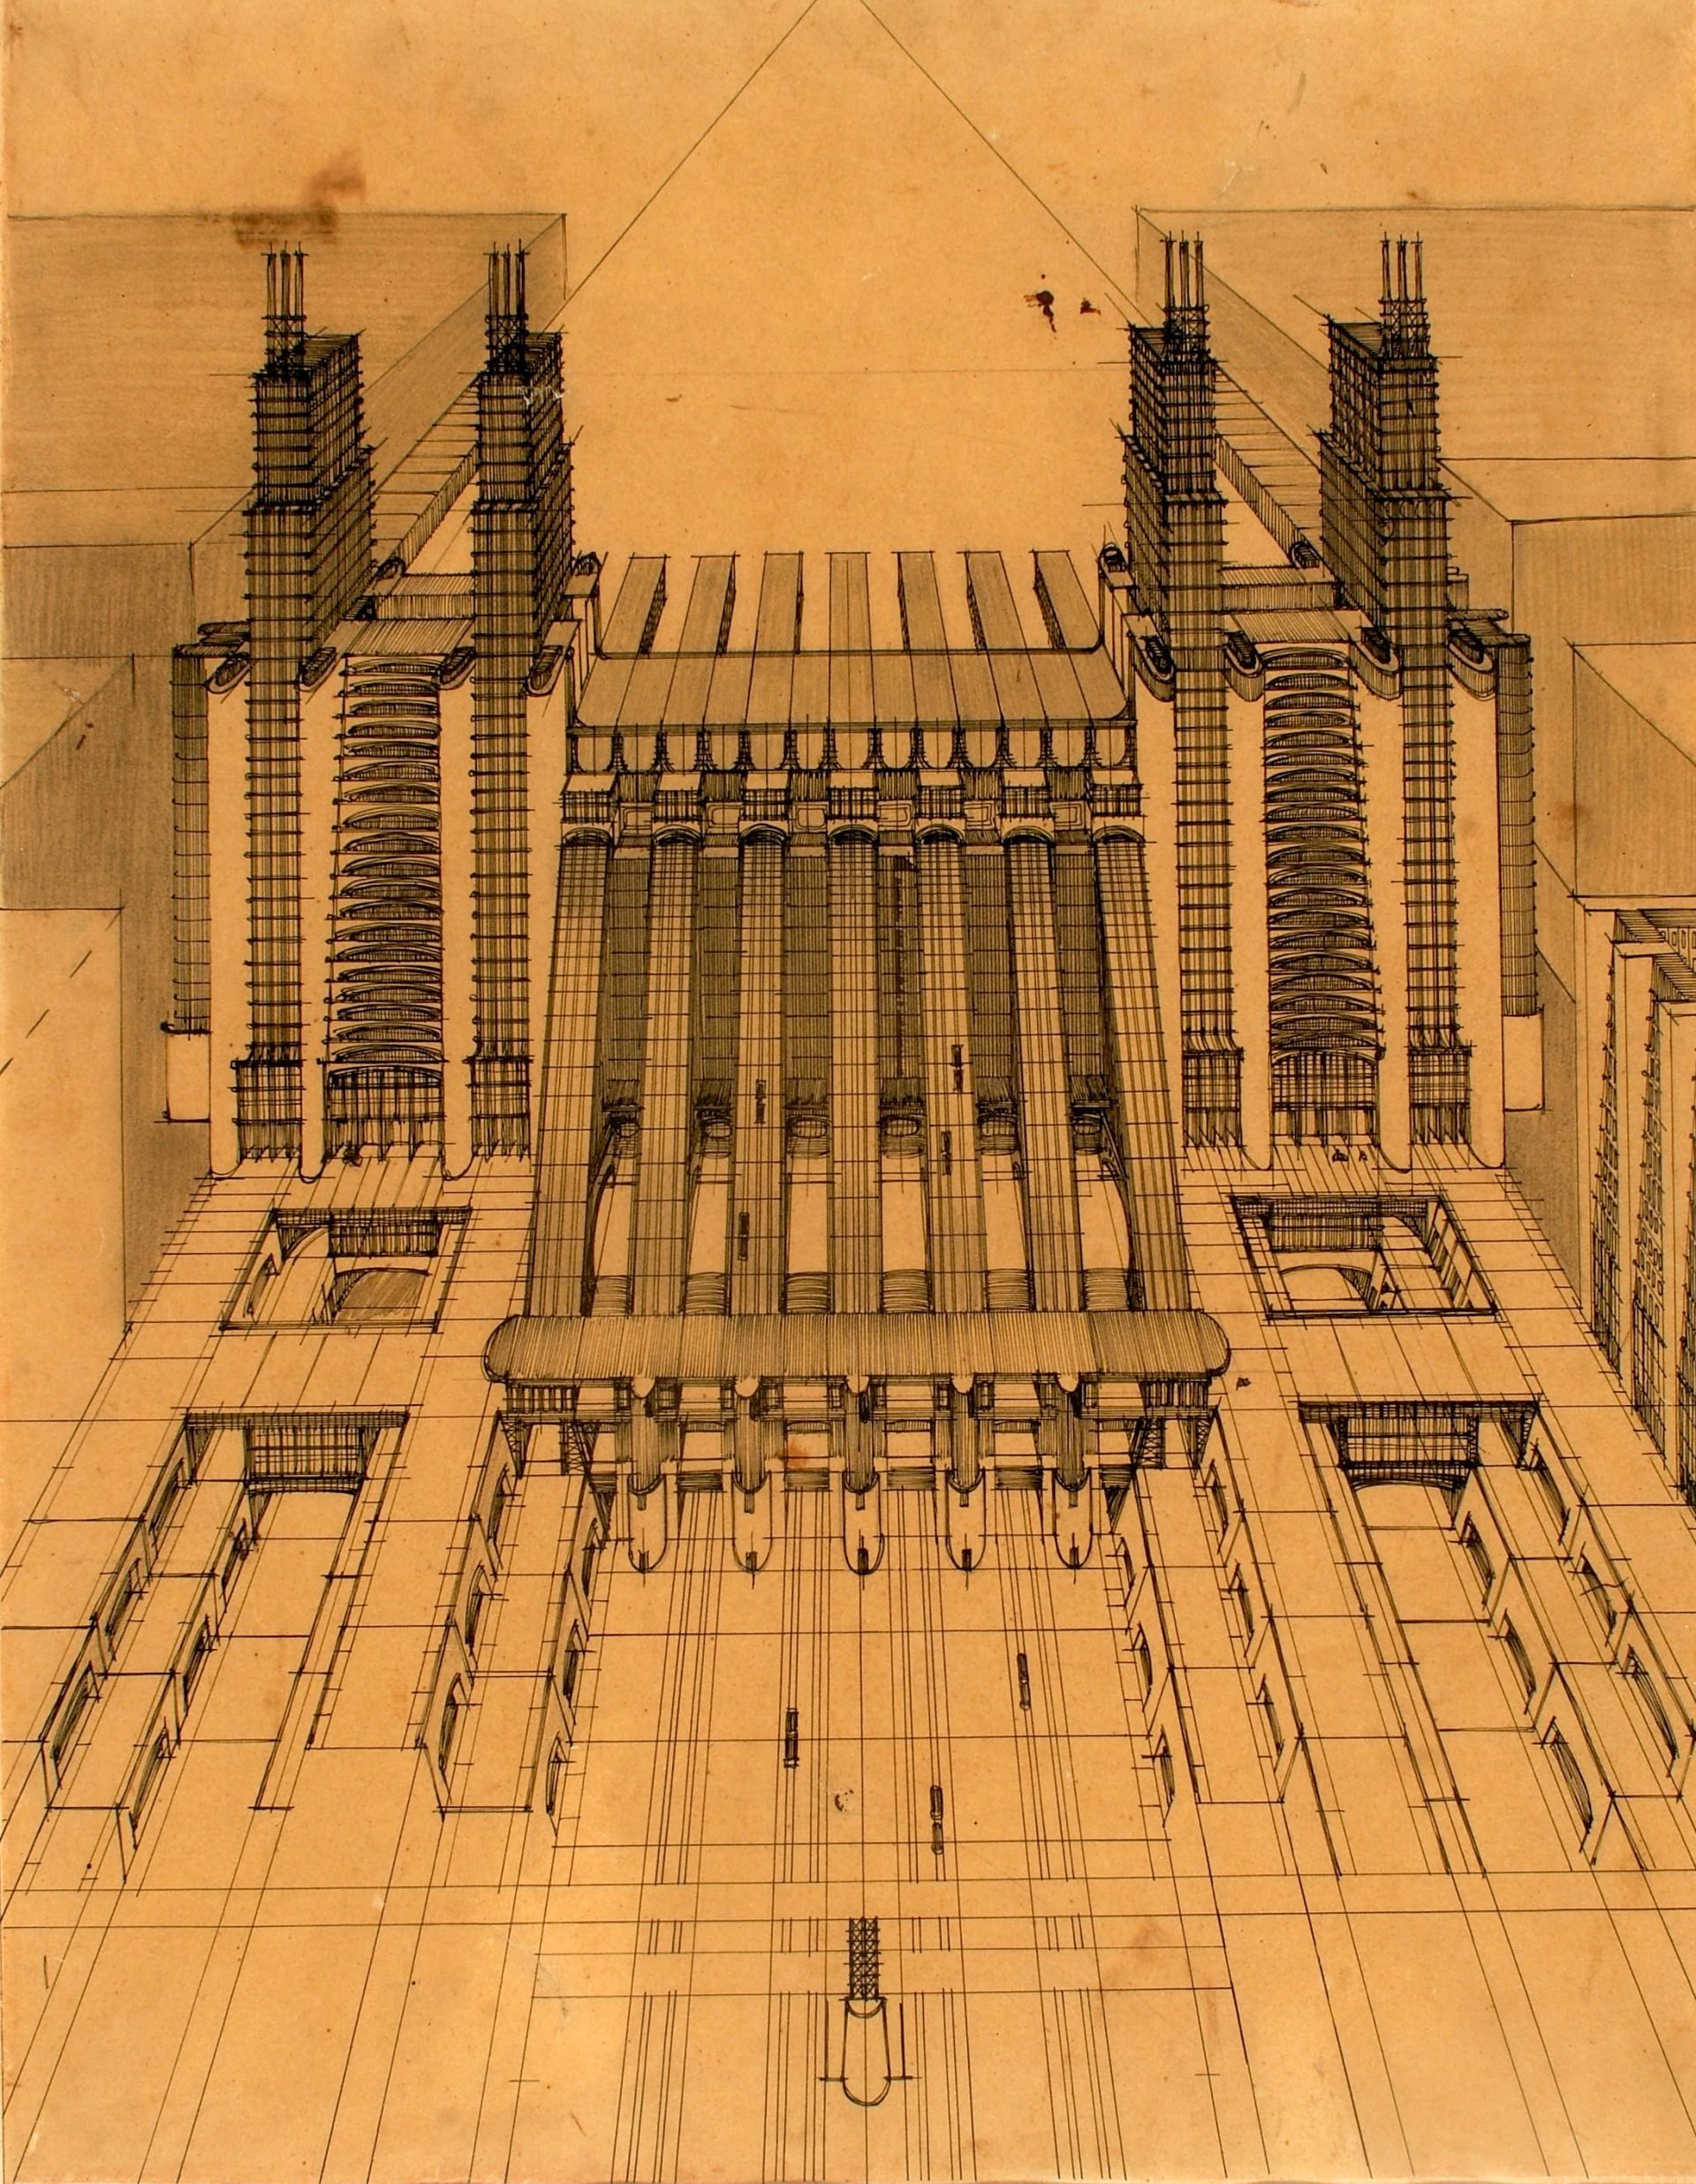 A detailed architectural drawing titled 'Air and Train Station with Funiculars' by Antonio Sant'Elia from 1914. The design presents an innovative and futuristic urban structure, with prominent vertical towers flanking a central building. These towers, resembling funiculars, are interconnected with a series of horizontal beams and walkways. The main building features multiple rows of large rectangular windows and intricate detailing. The ground level showcases railways, platforms, and other transport-related elements, all intricately sketched with precise lines. The entire composition exemplifies early 20th-century visionary architecture, blending functionality with avant-garde design.